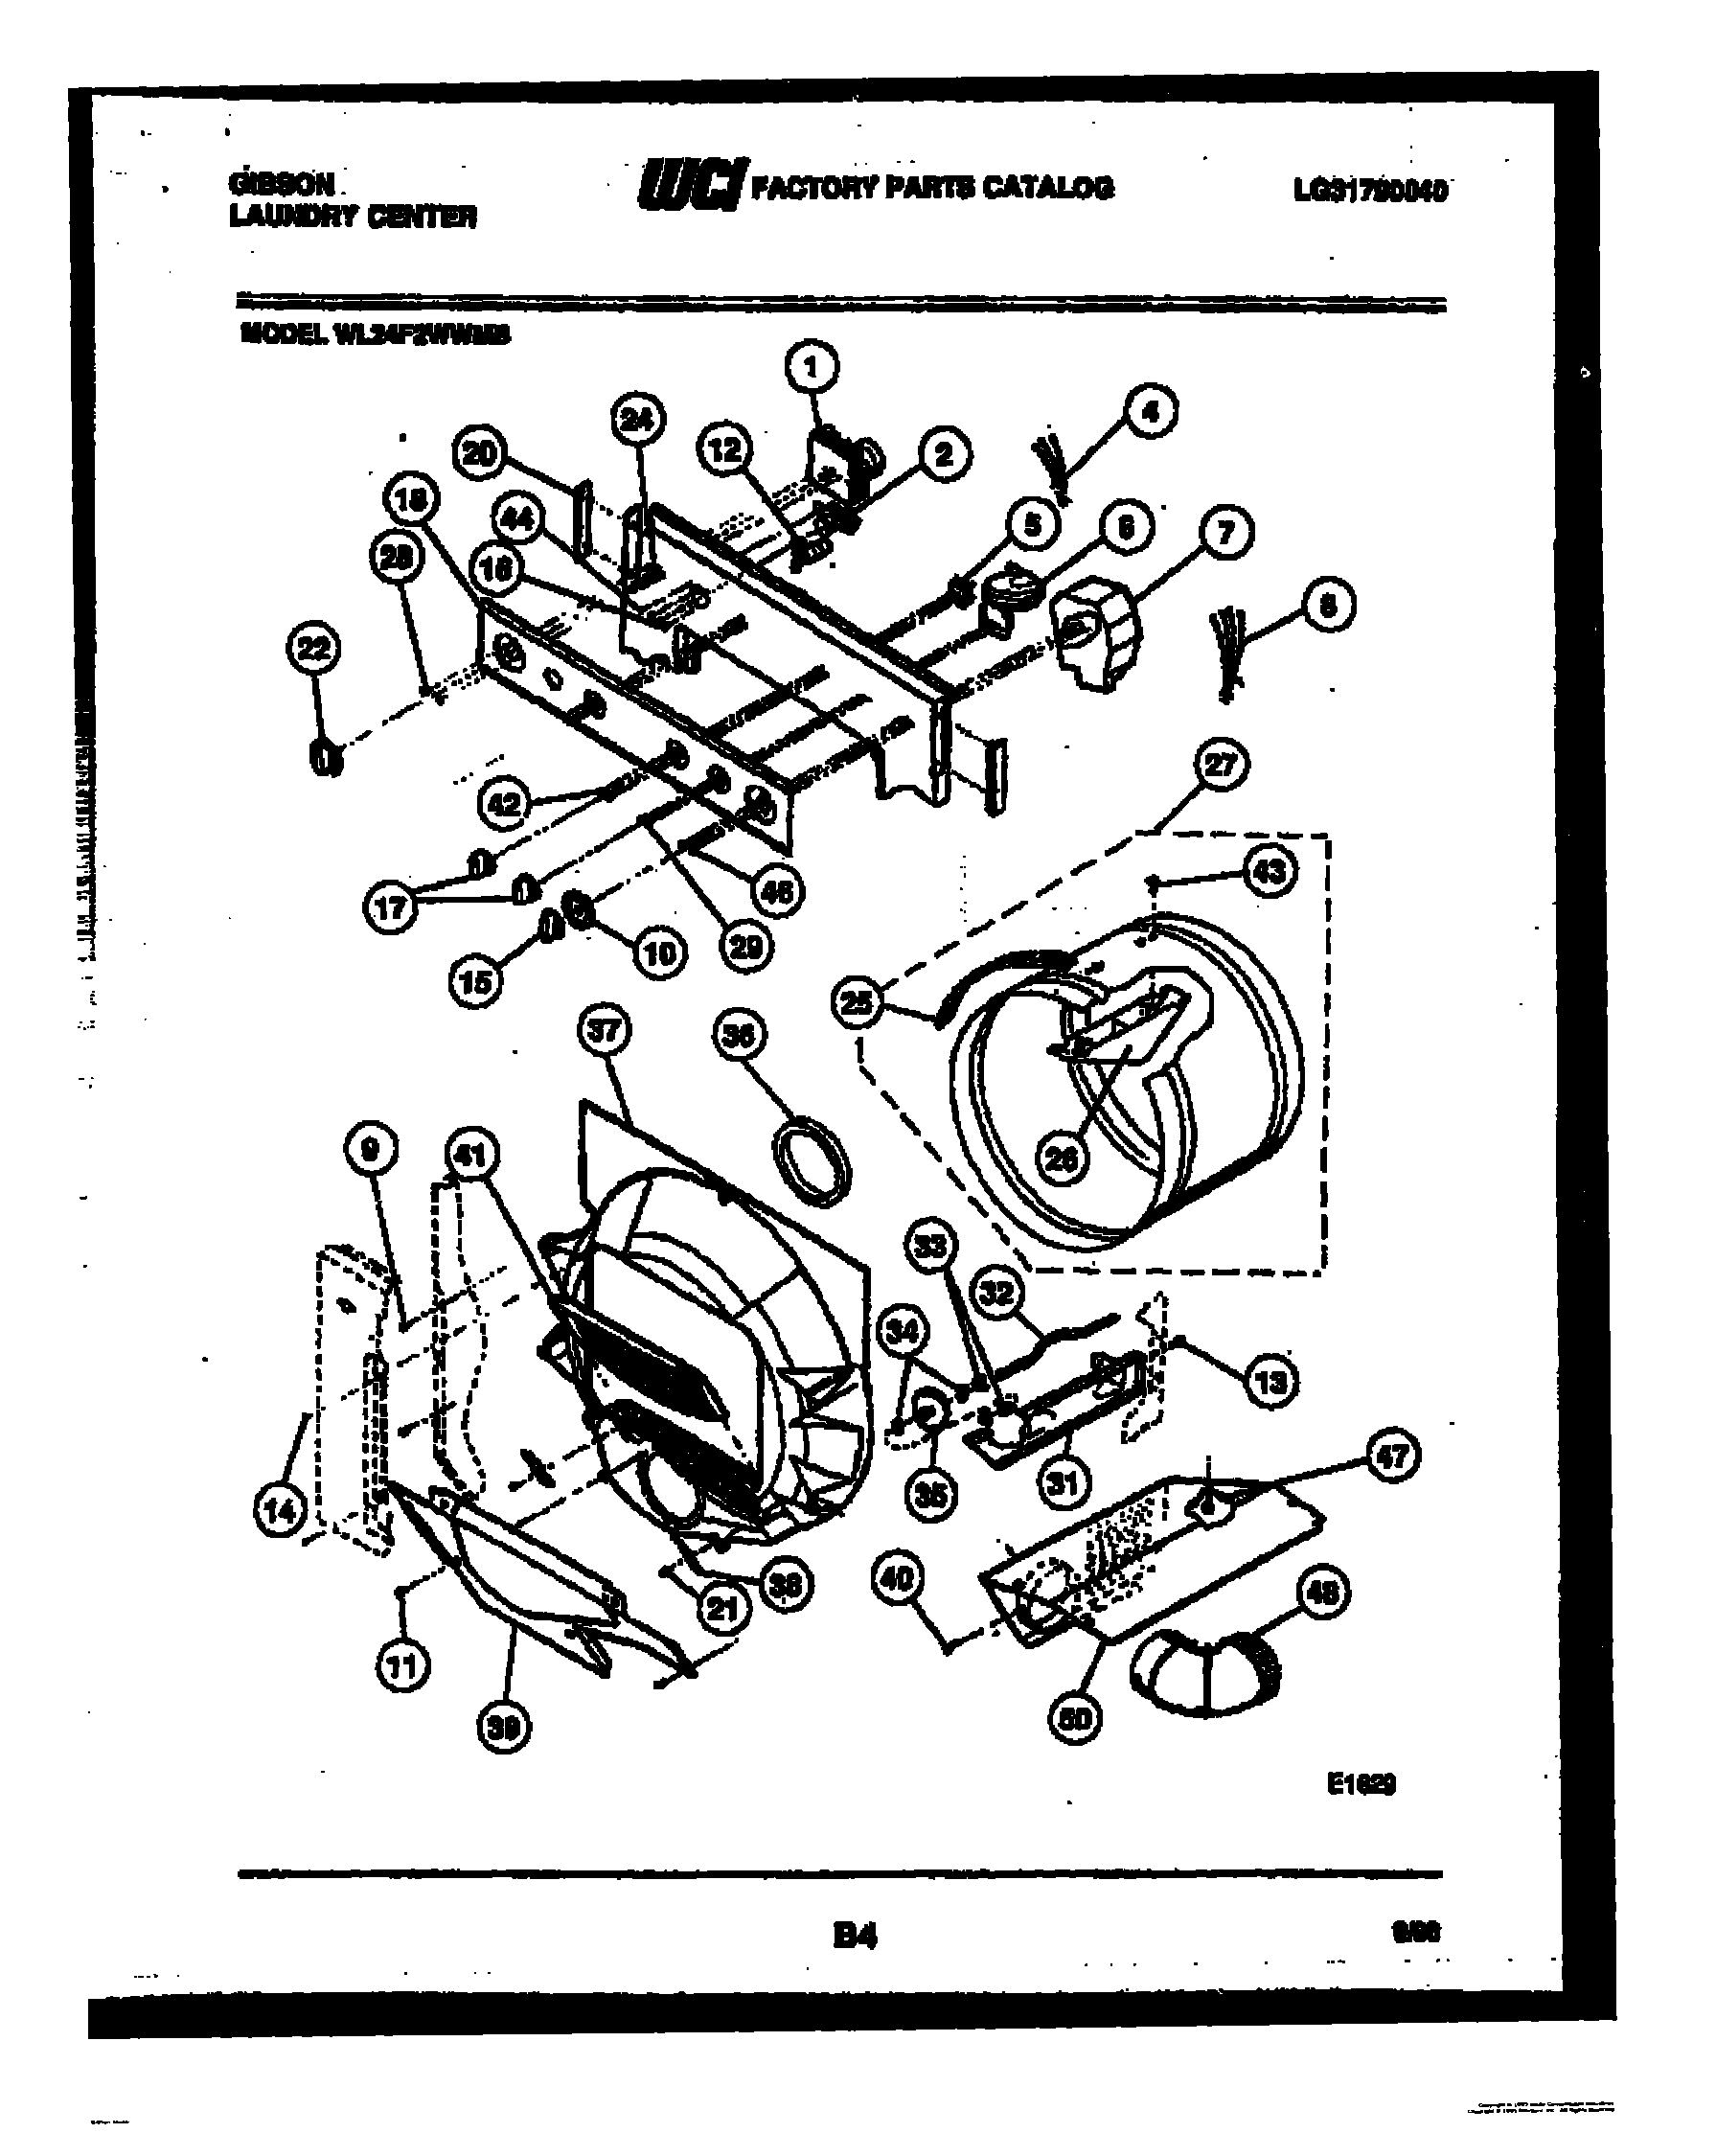 03 - CONTROL, DRUM AND BLOWER PARTS